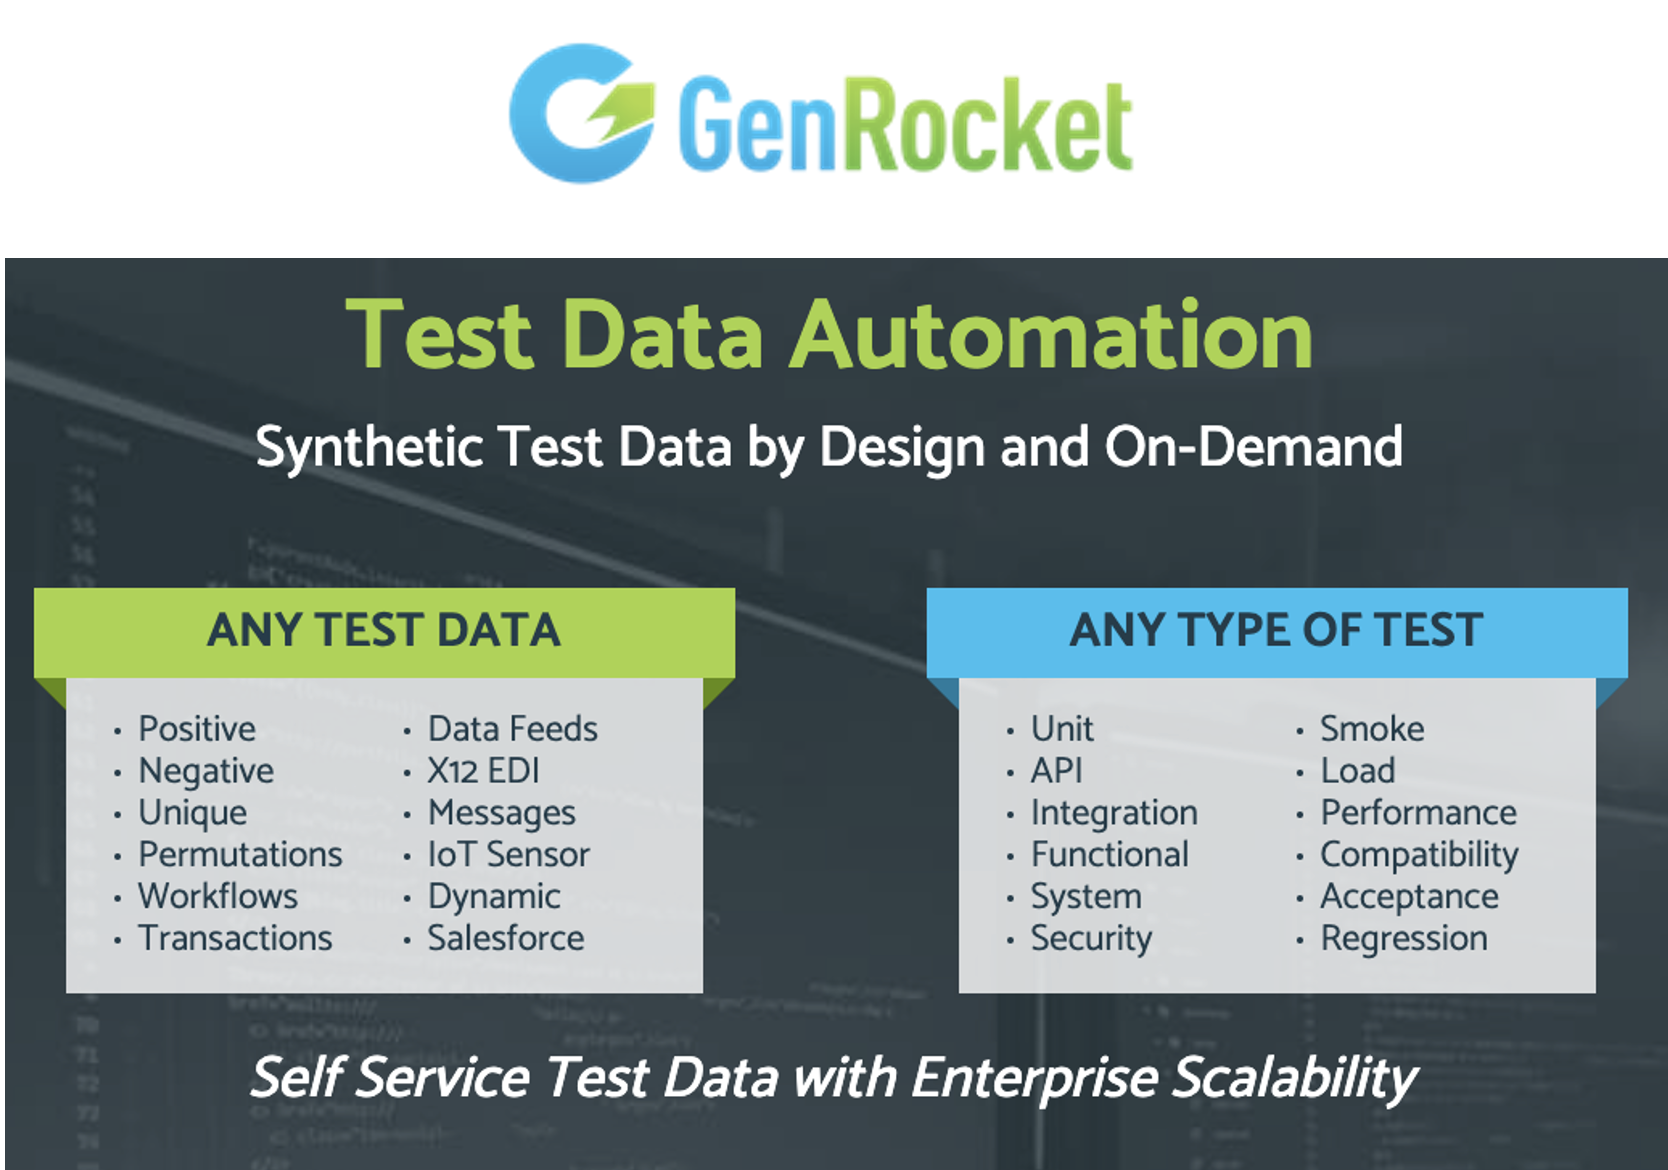 GenRocket Delivers Synthetic Test Data Automation with Enterprise Scalability